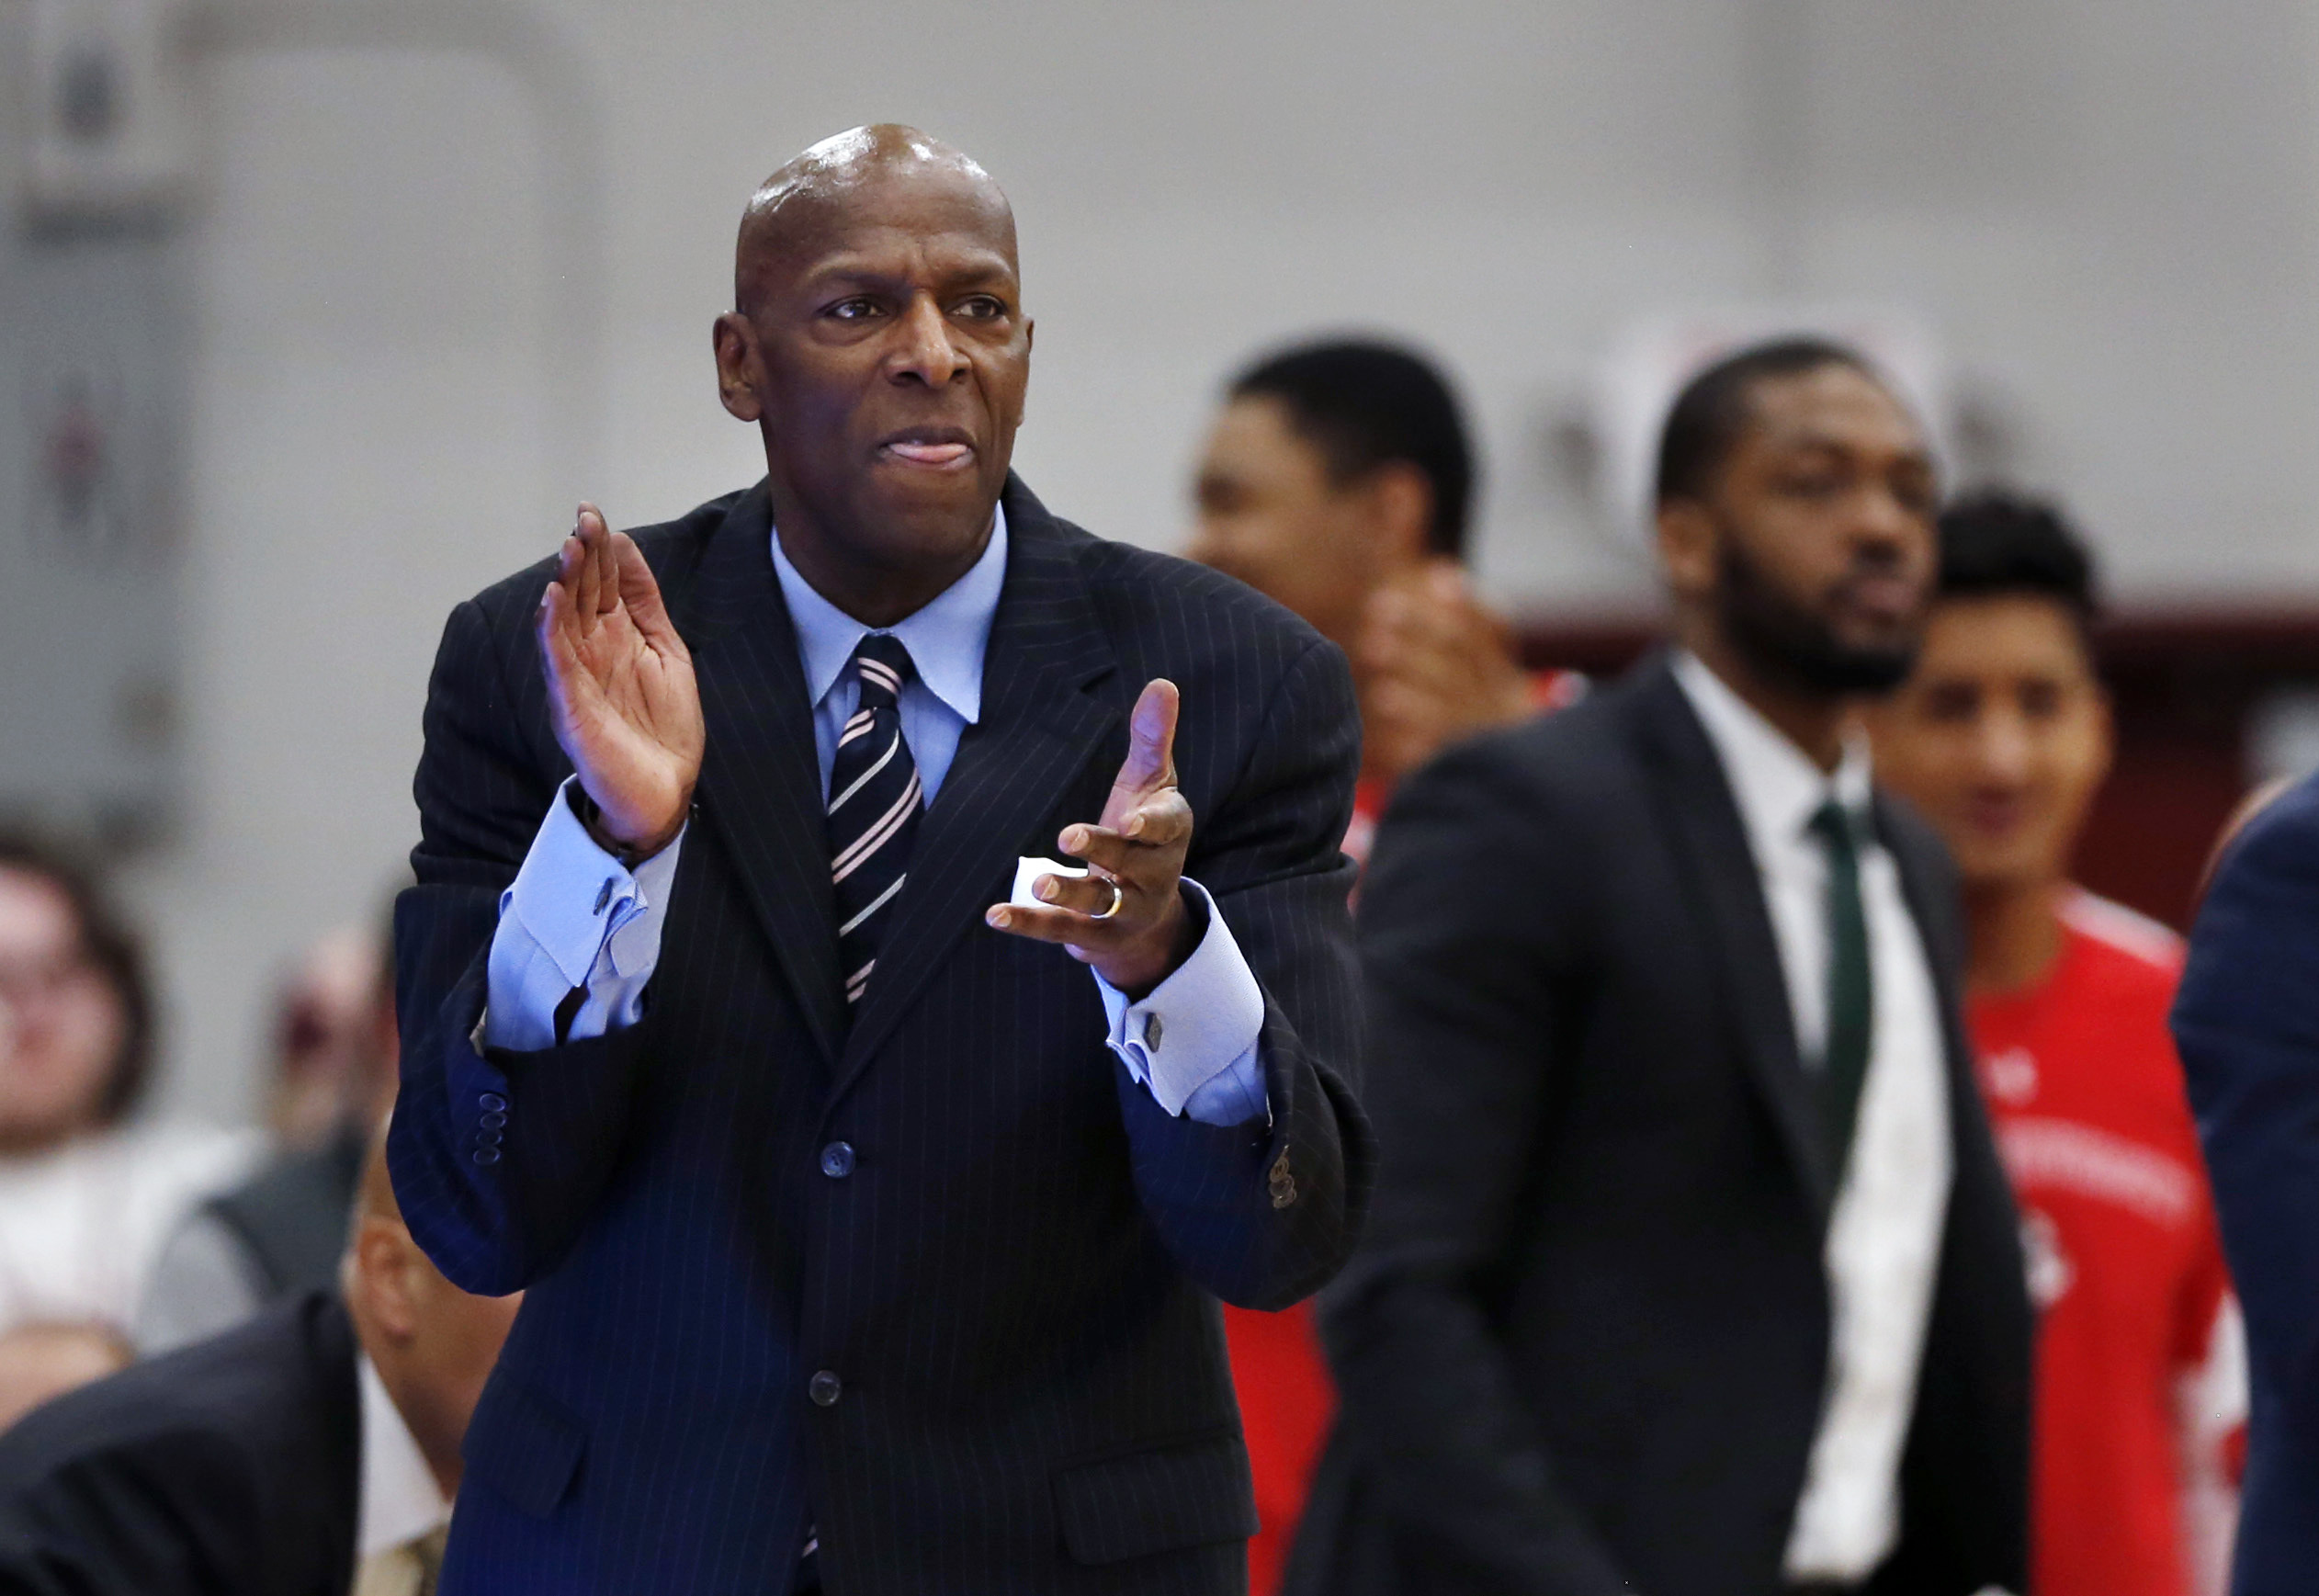 With emotion, BU men's basketball coach Joe Jones says 'we've got to find a  way to be better' - The Boston Globe